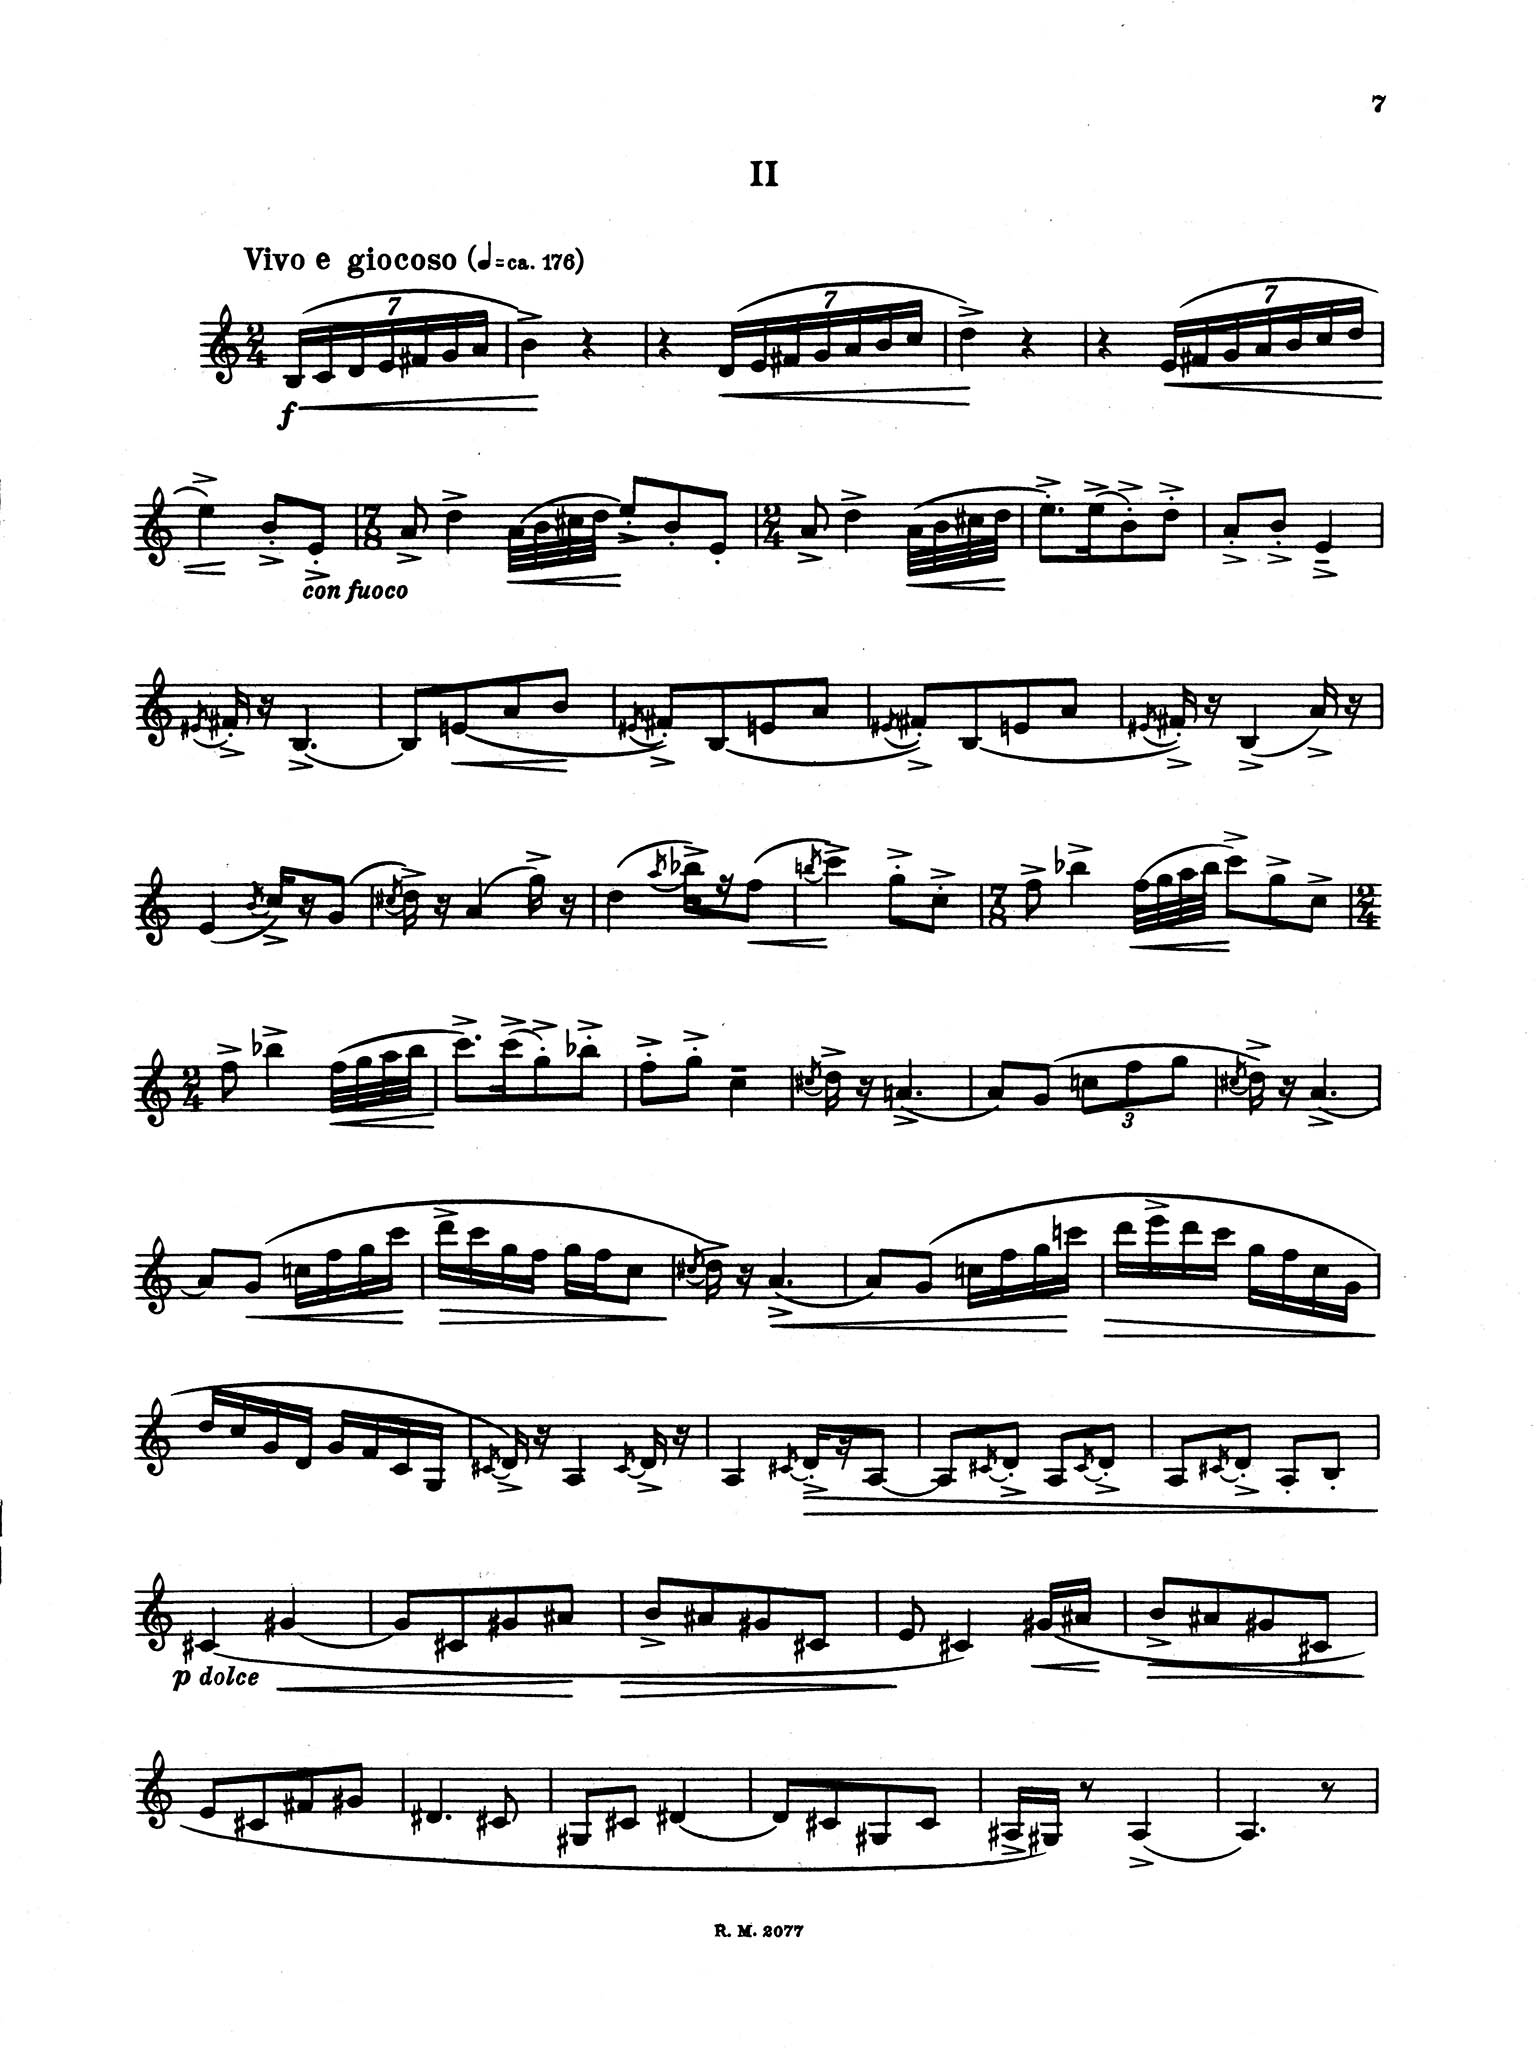 Sonatina for Clarinet Solo, Op. 27 - Movement 2